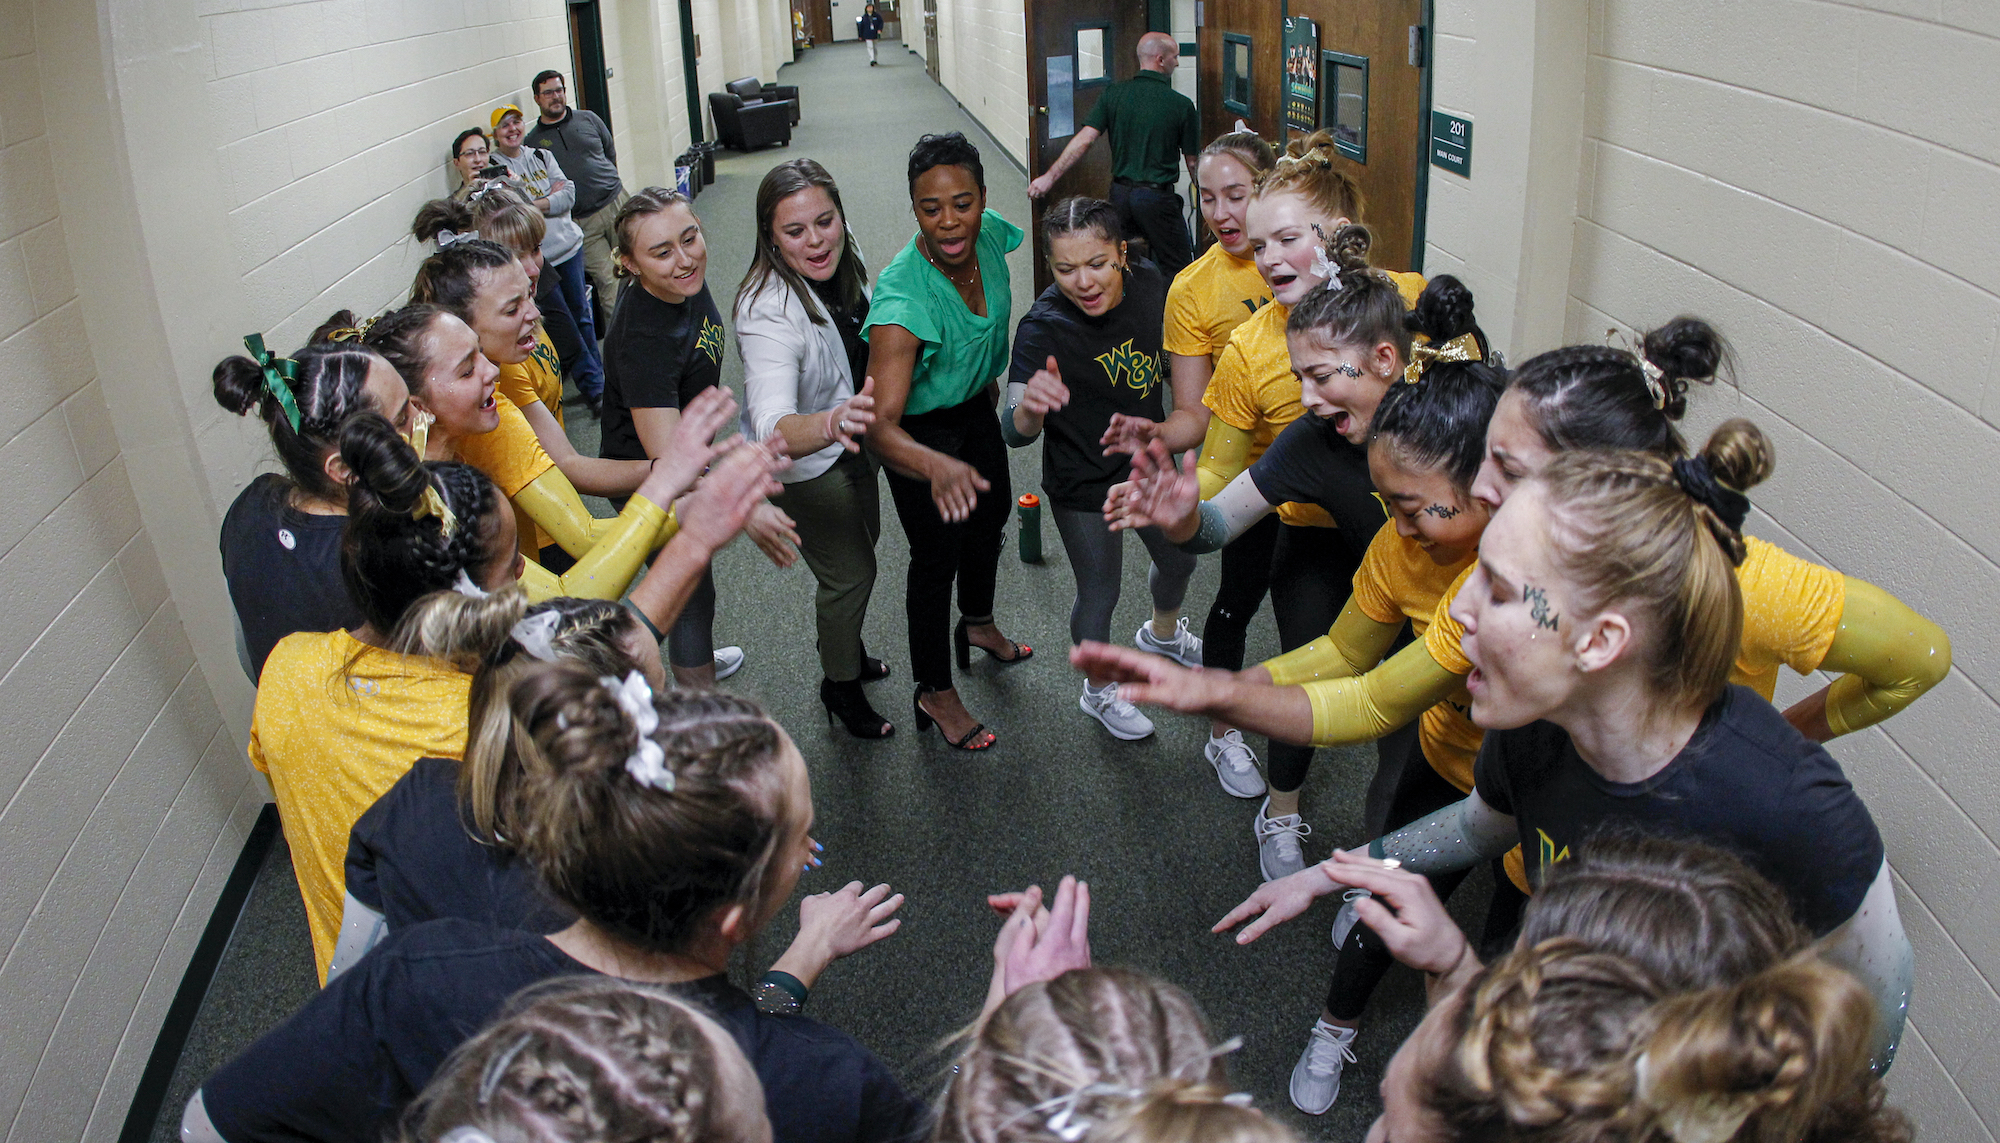 The 2022 women's gymnastics team in a huddle before a meet